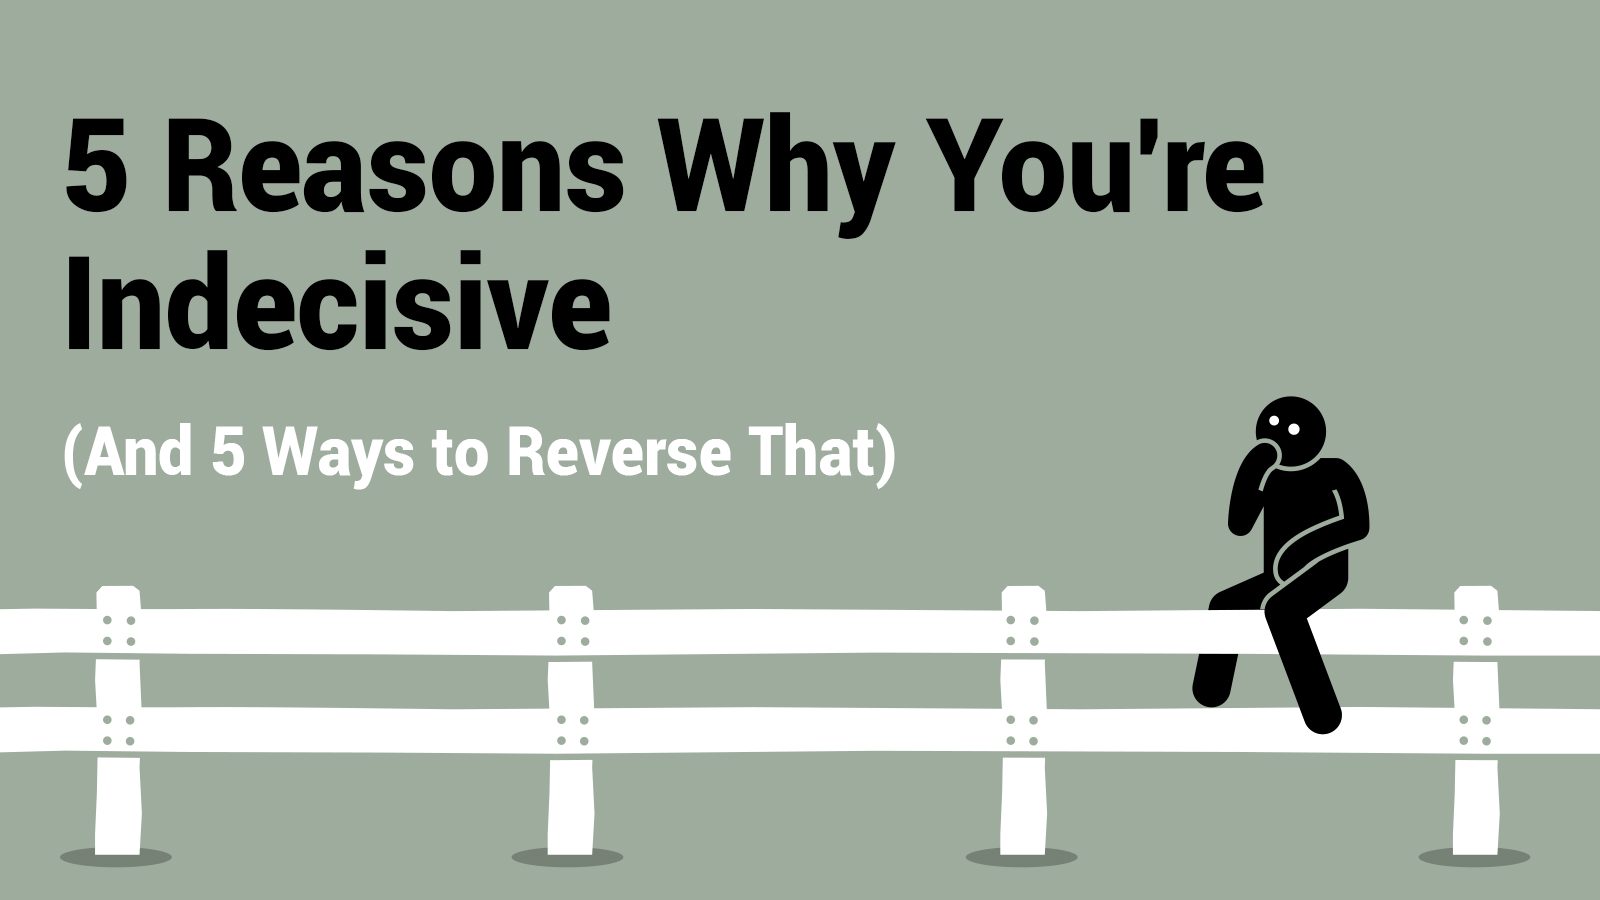 5 Reasons Why You’re Indecisive (And 5 Ways to Reverse It)